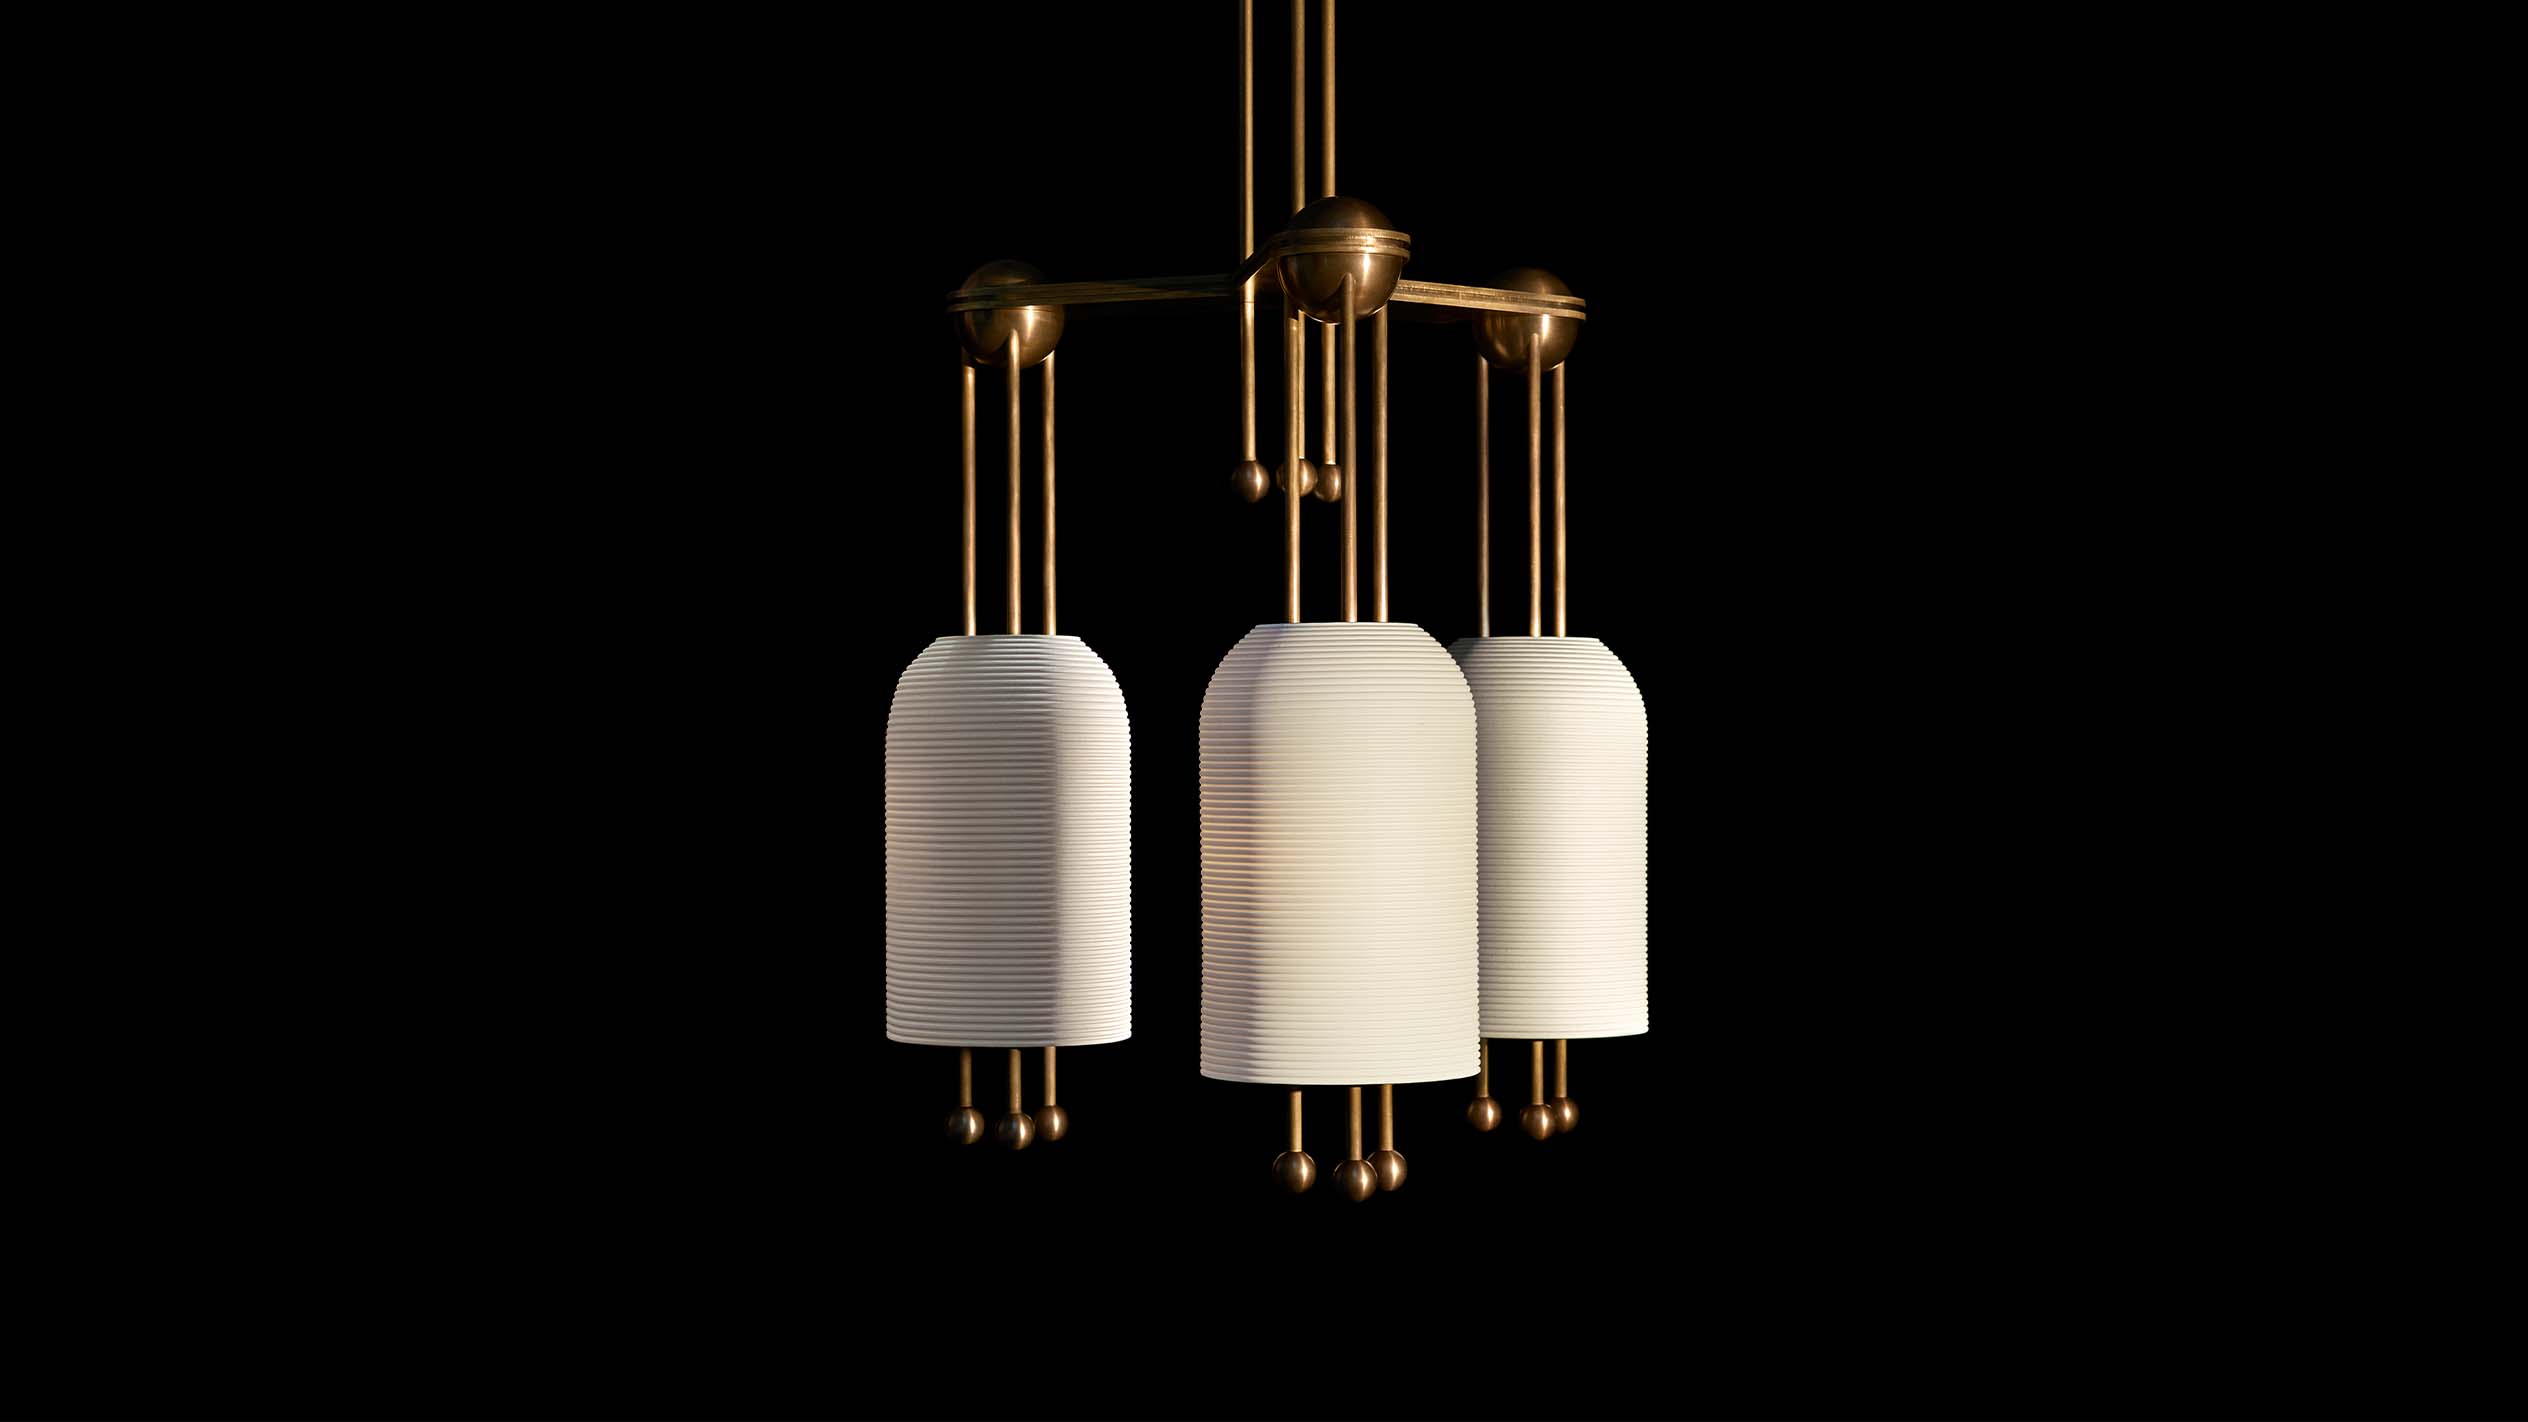 LANTERN : 3 ceiling pendant in Aged Brass finish hanging against a black background. 